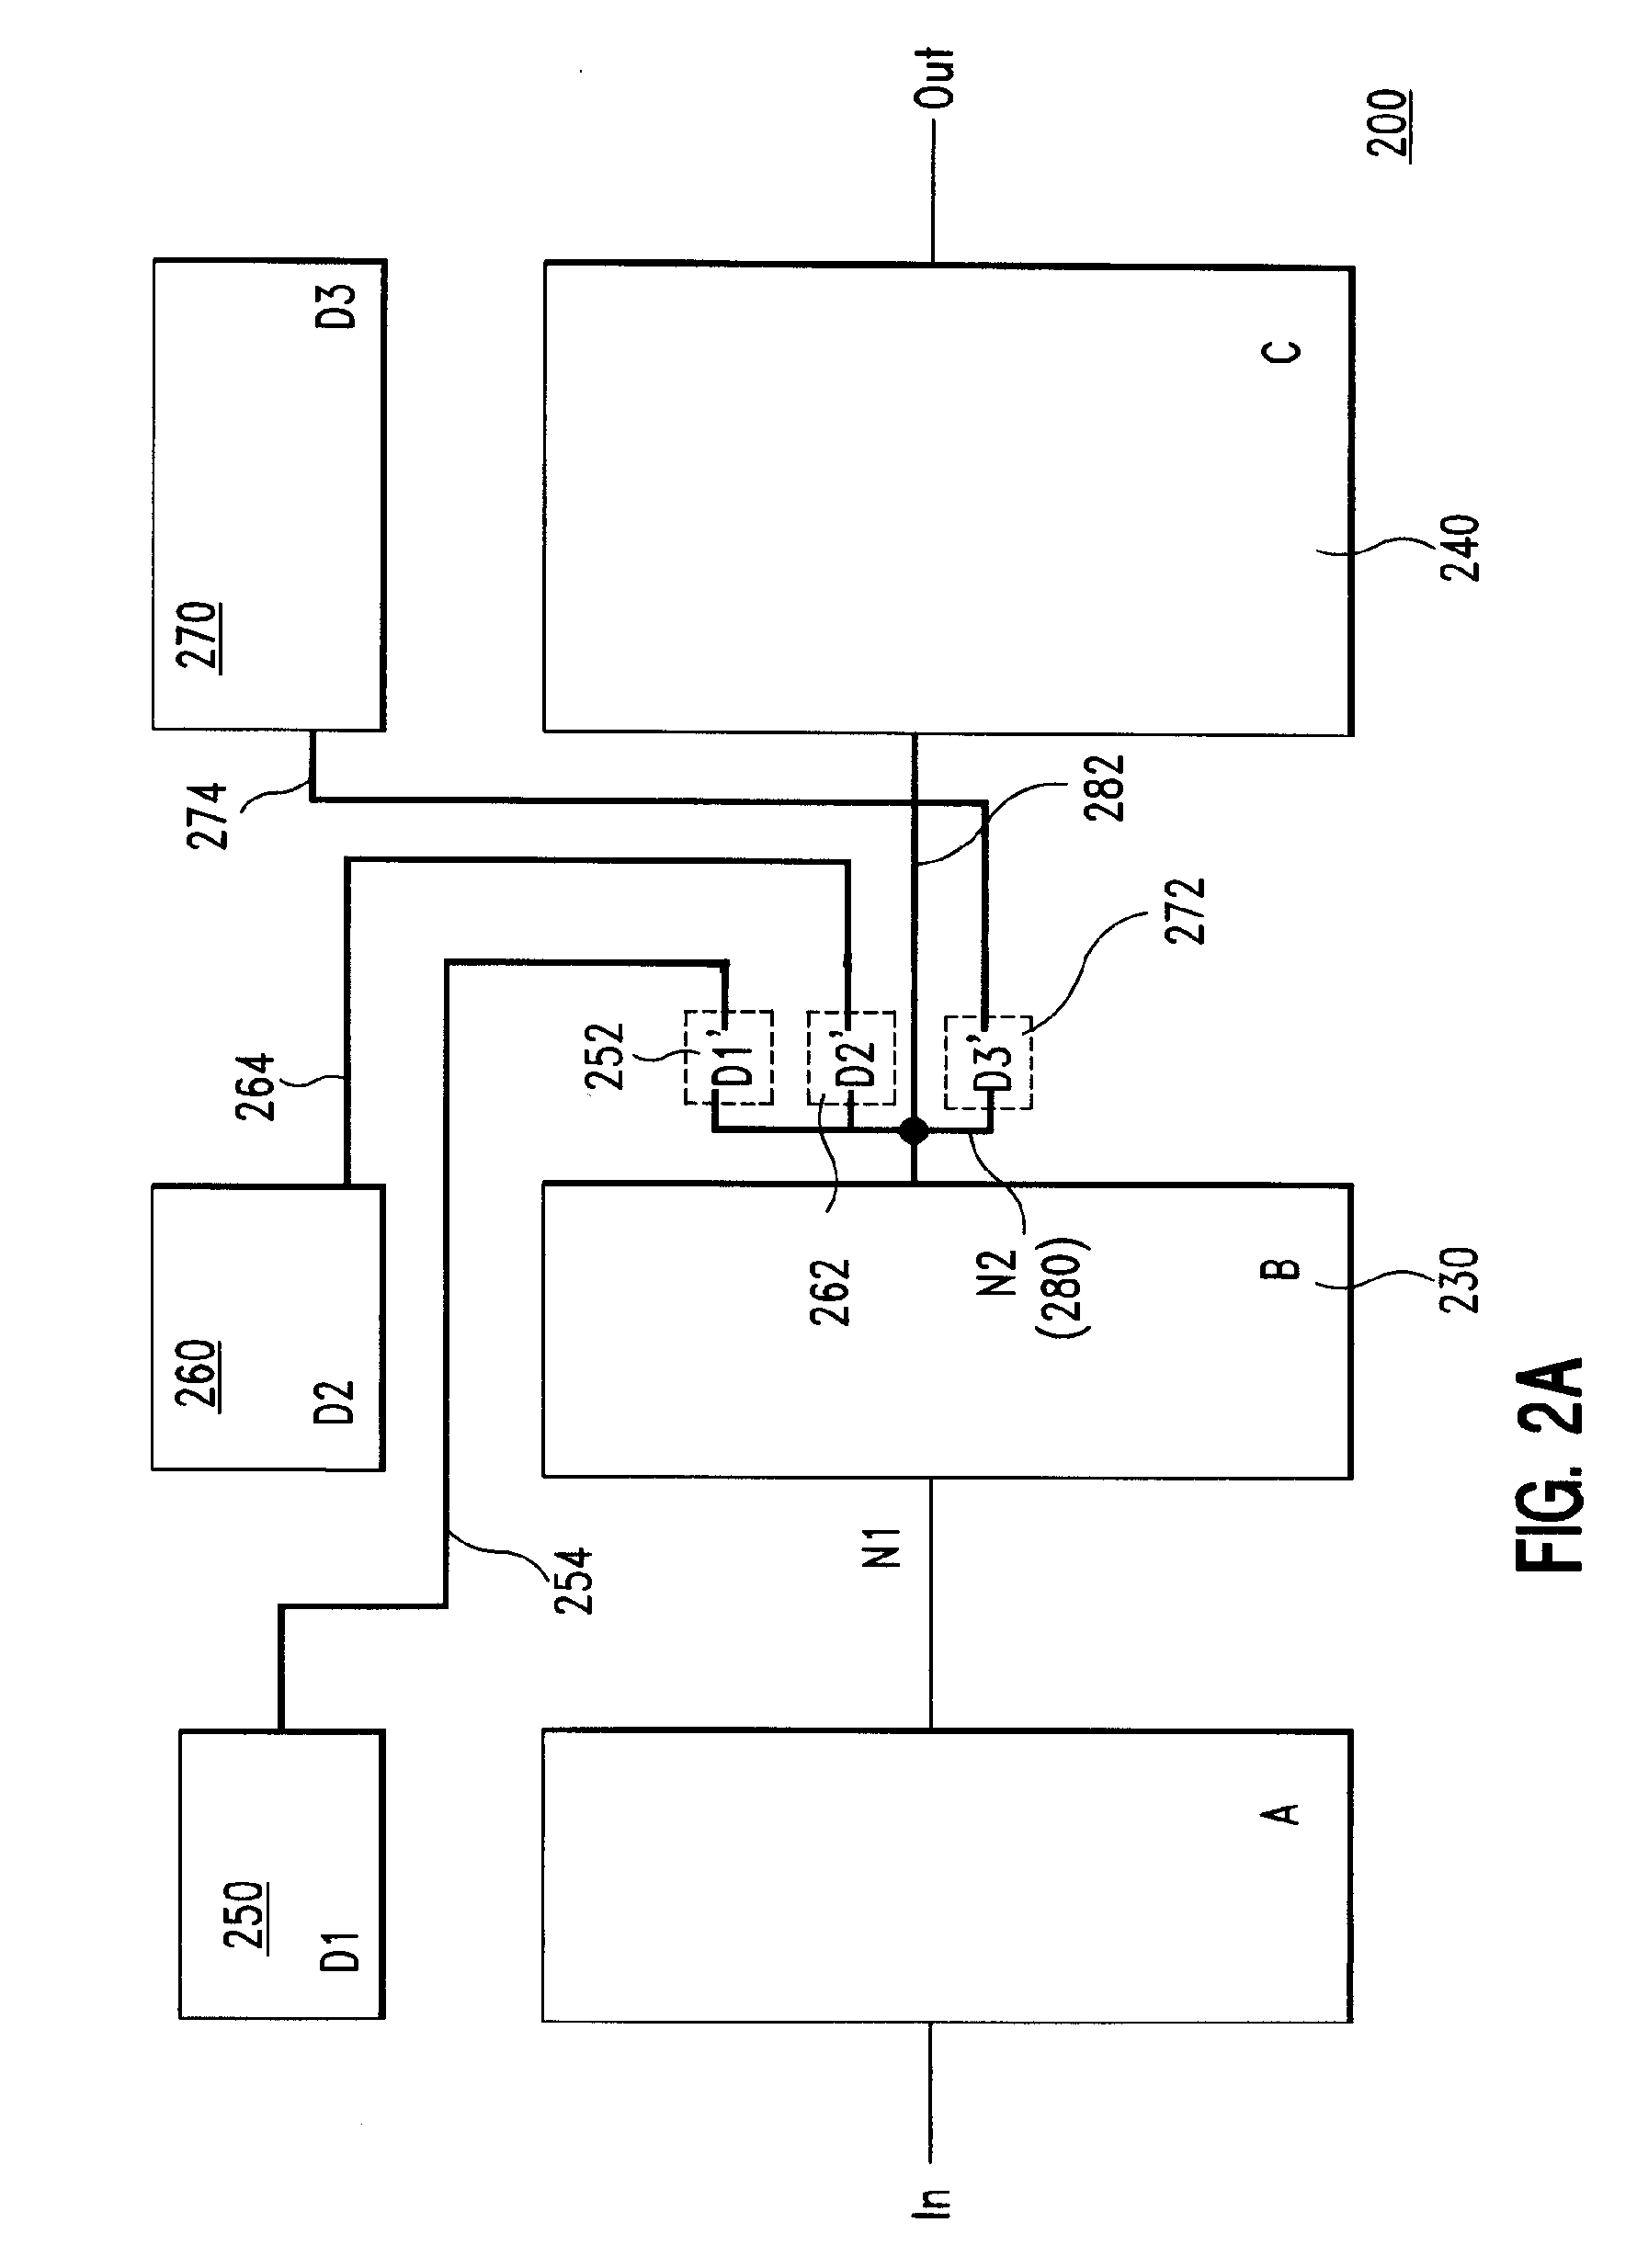 Apparatus and method for reduced loading of signal transmission elements